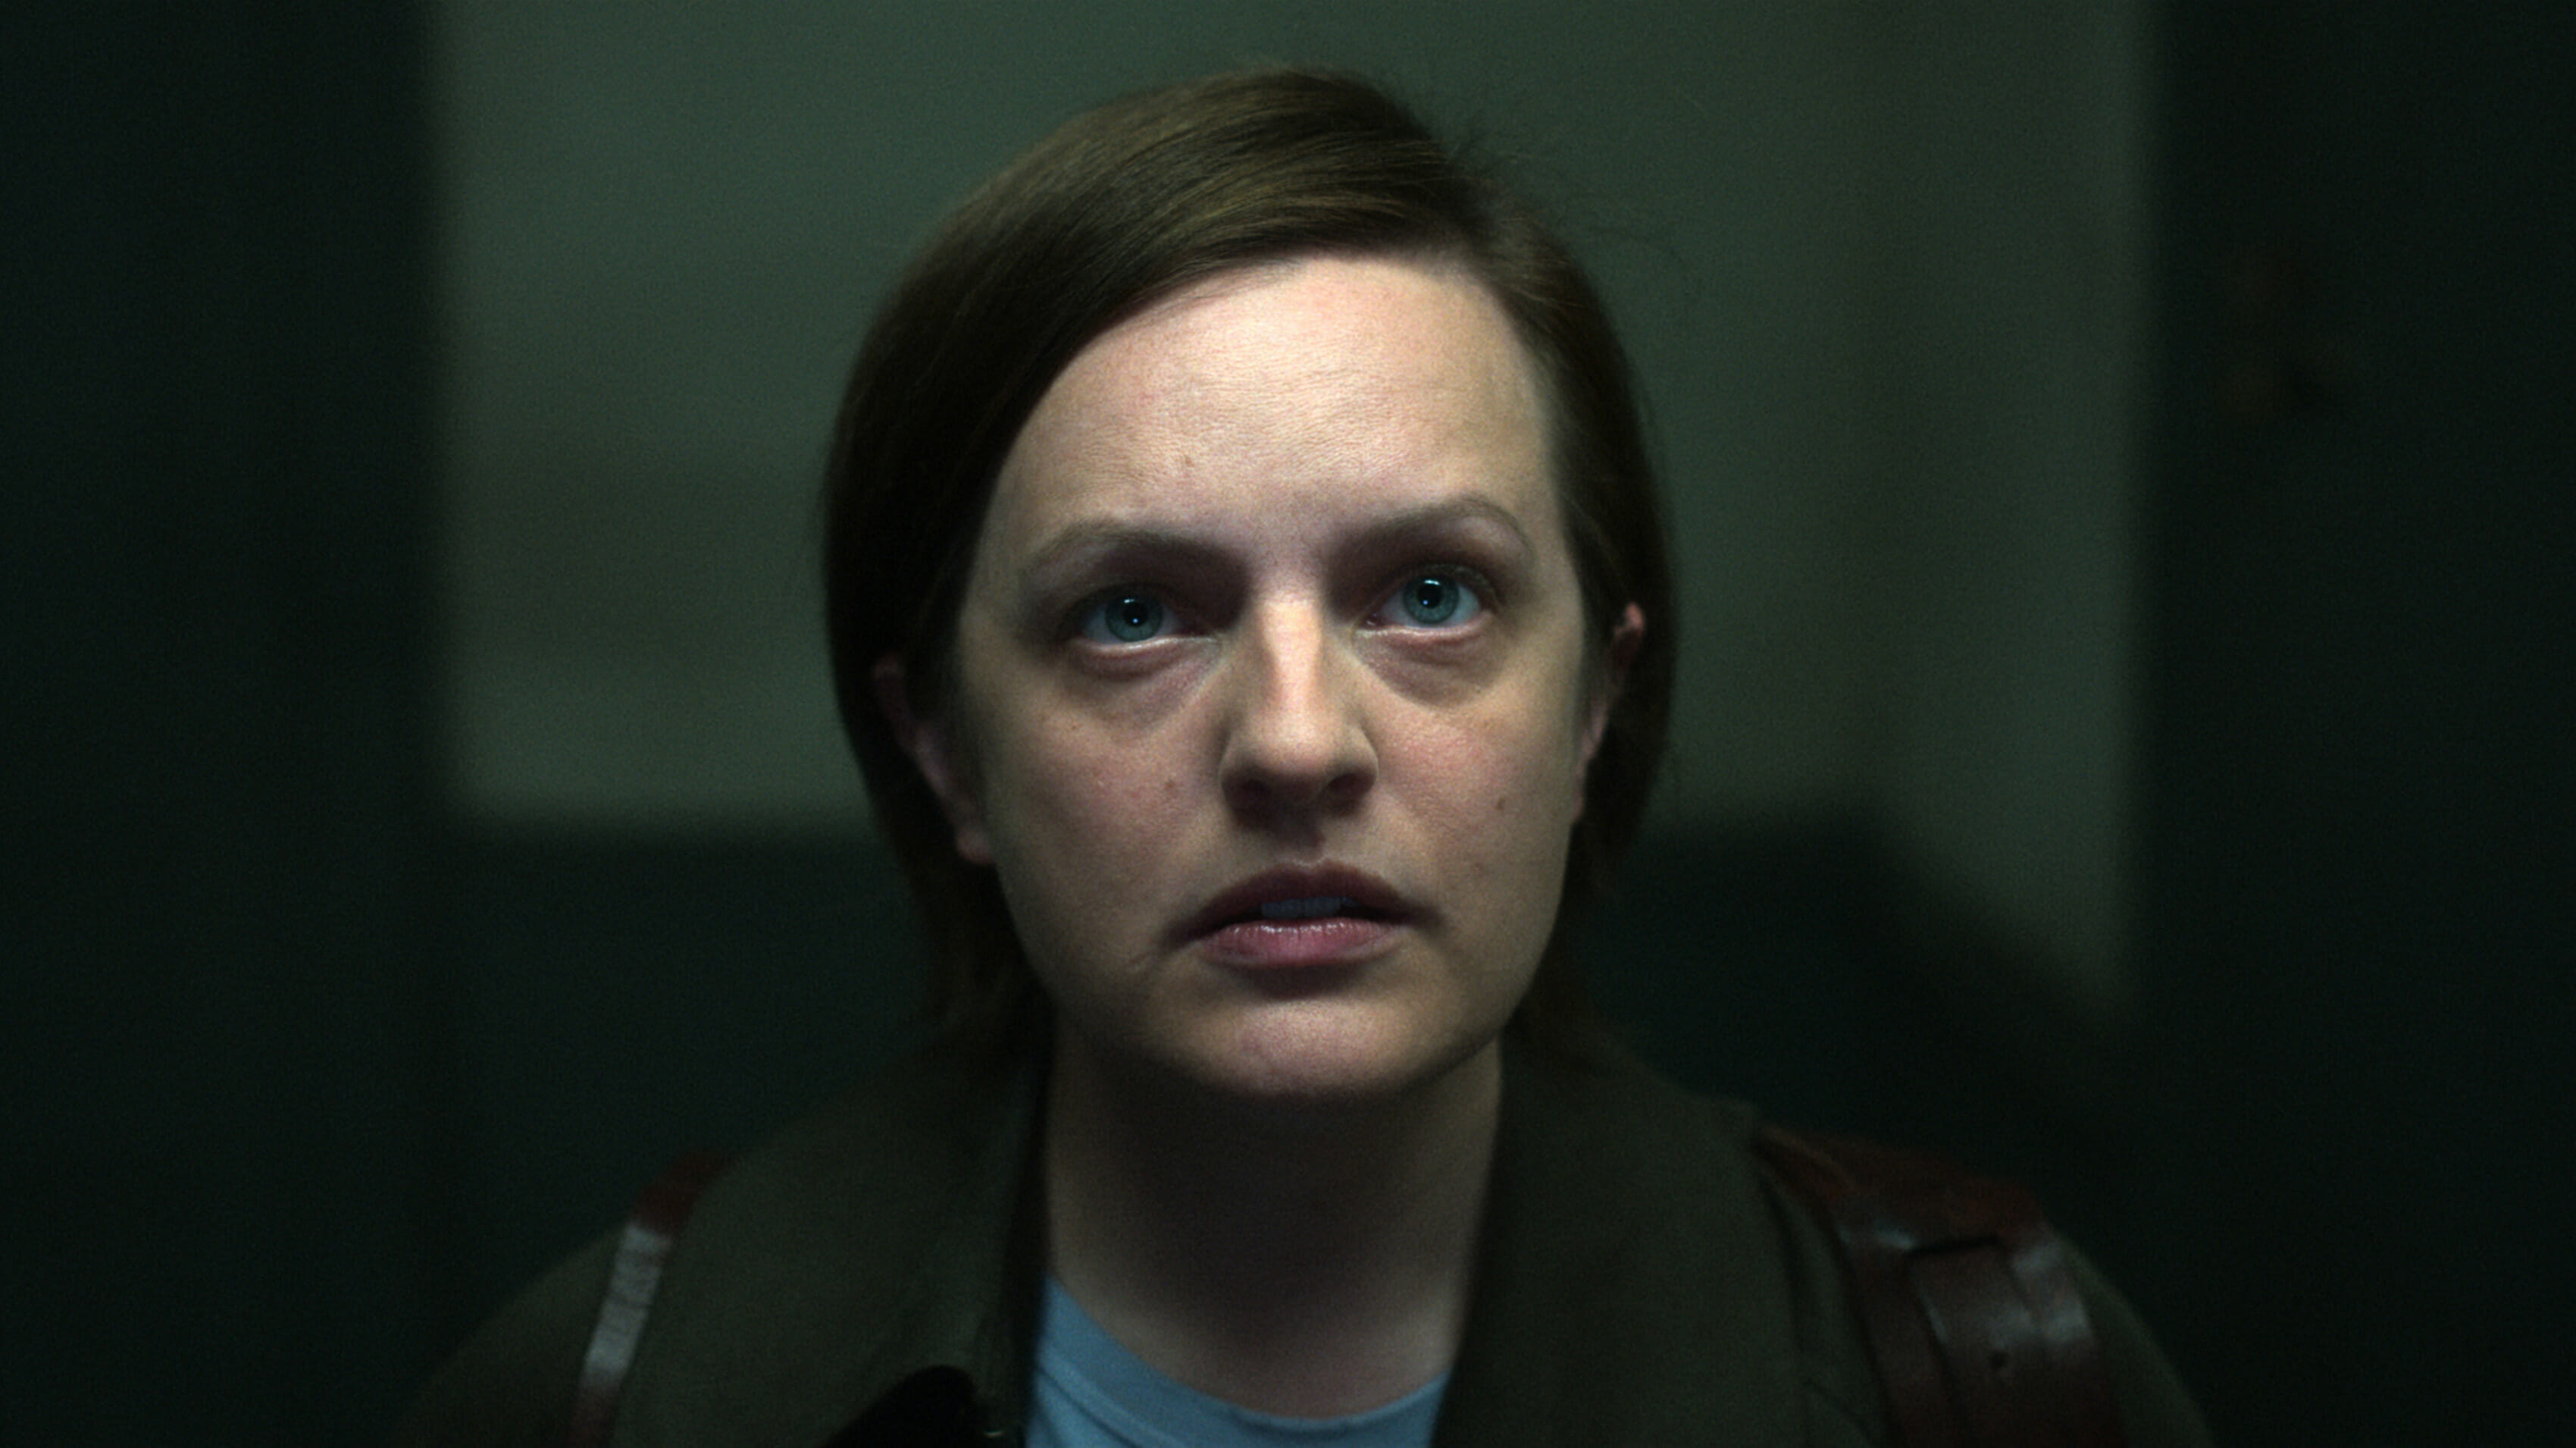 The Trailer for Shining Girls Drops Elisabeth Moss in the Center of Apple TV+’s Latest Thriller